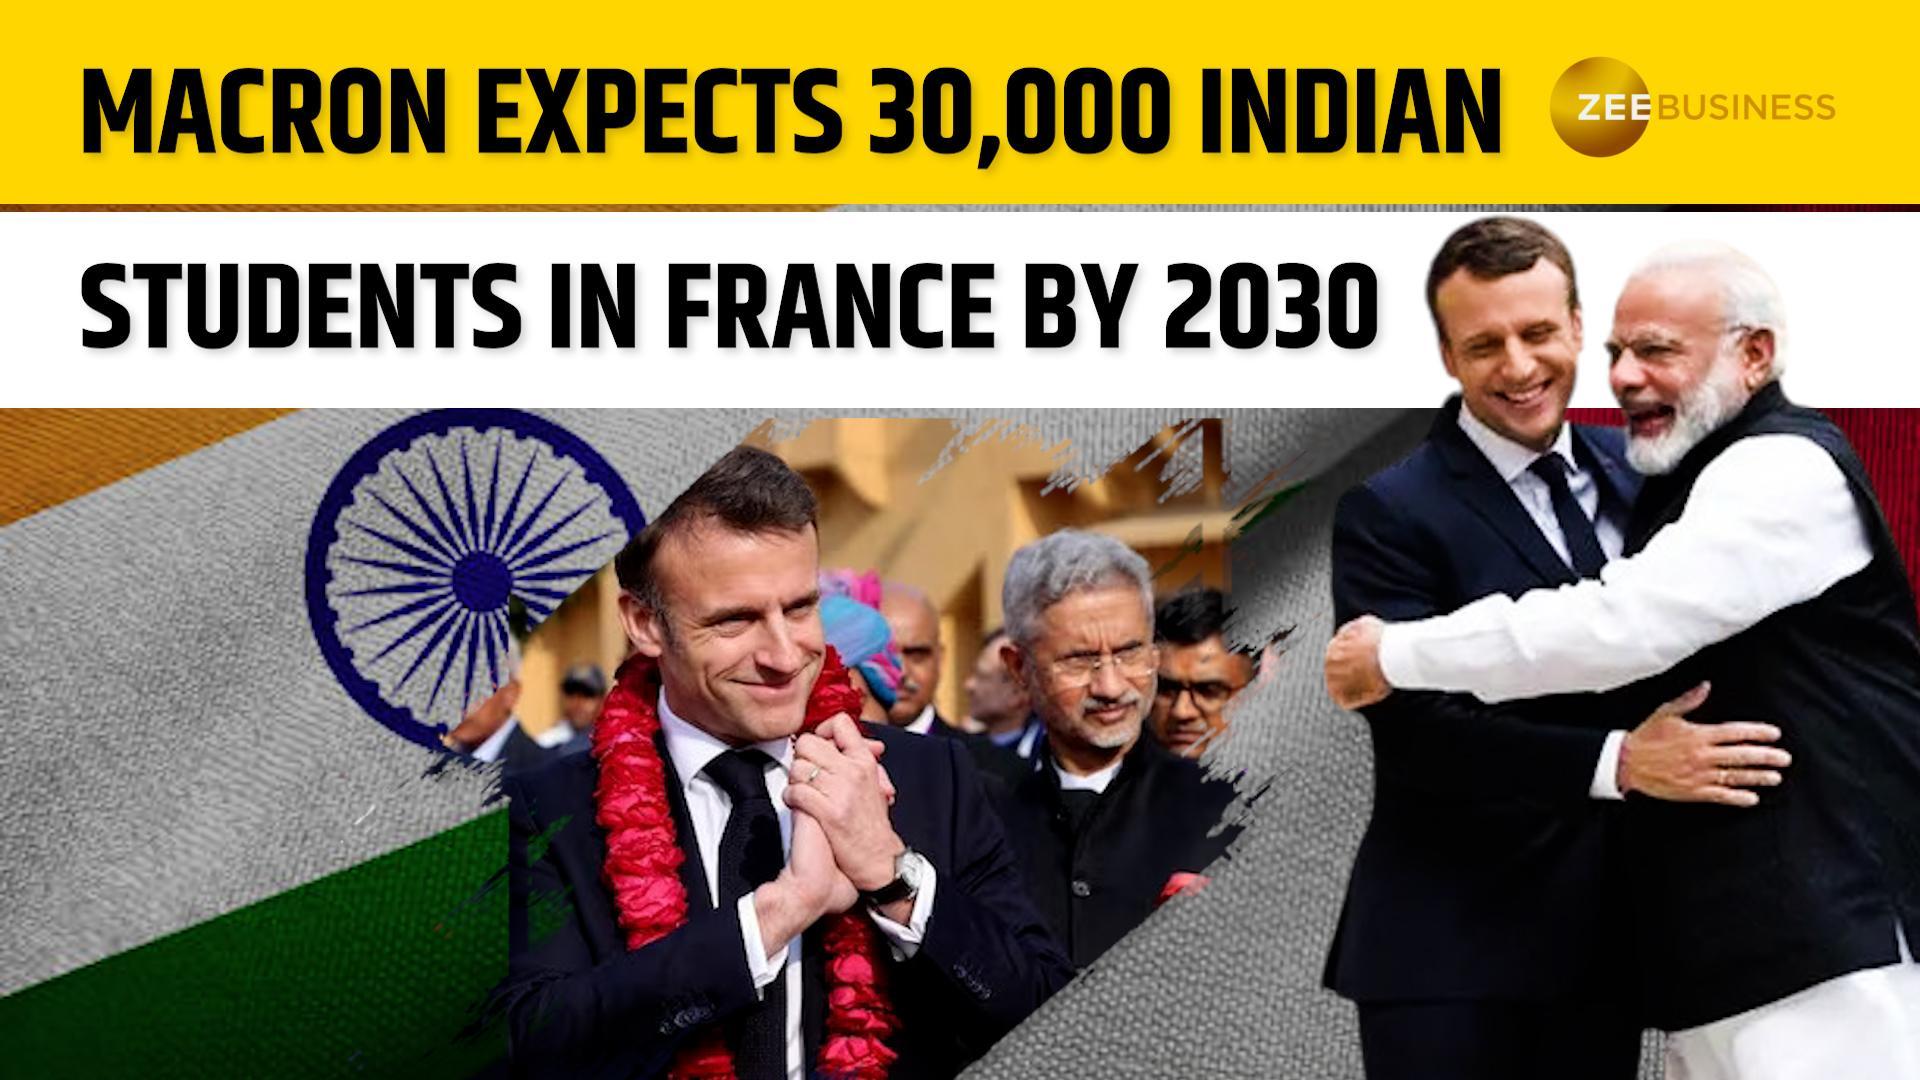 French President Macron Hails India's Global Role, Seeks Deeper Ties on Education, Defense 